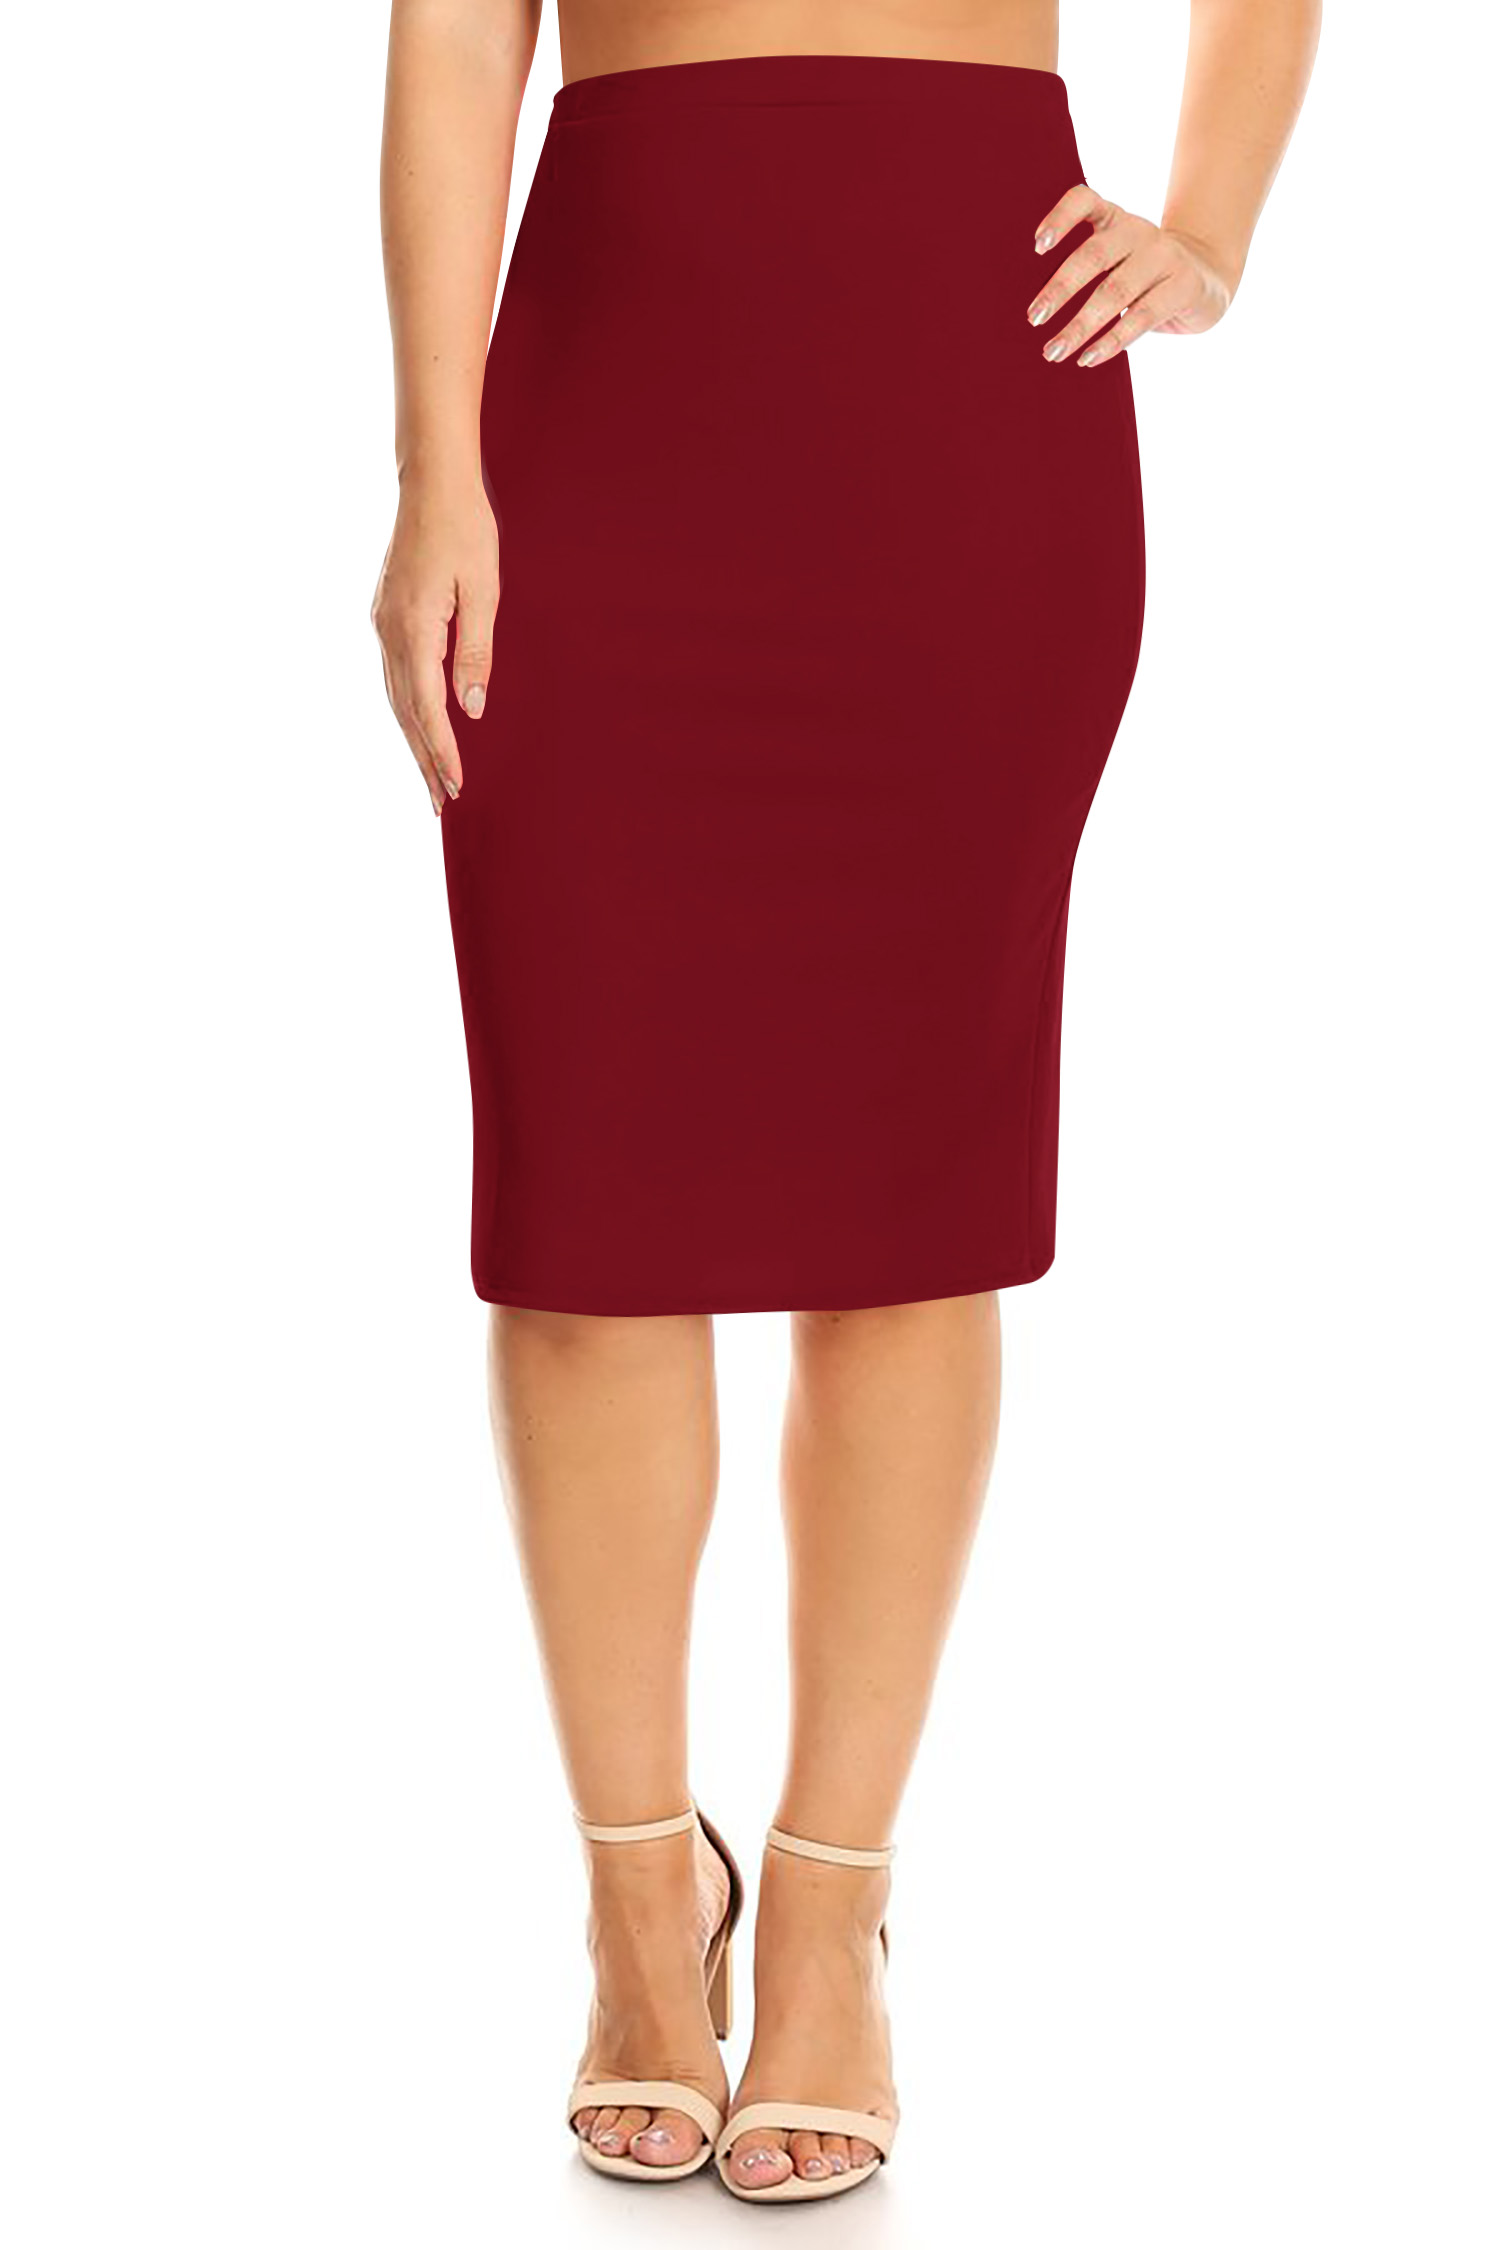 Thanth Womens Waist Band Streychy Solid Pencil Skirt Plus Size Available